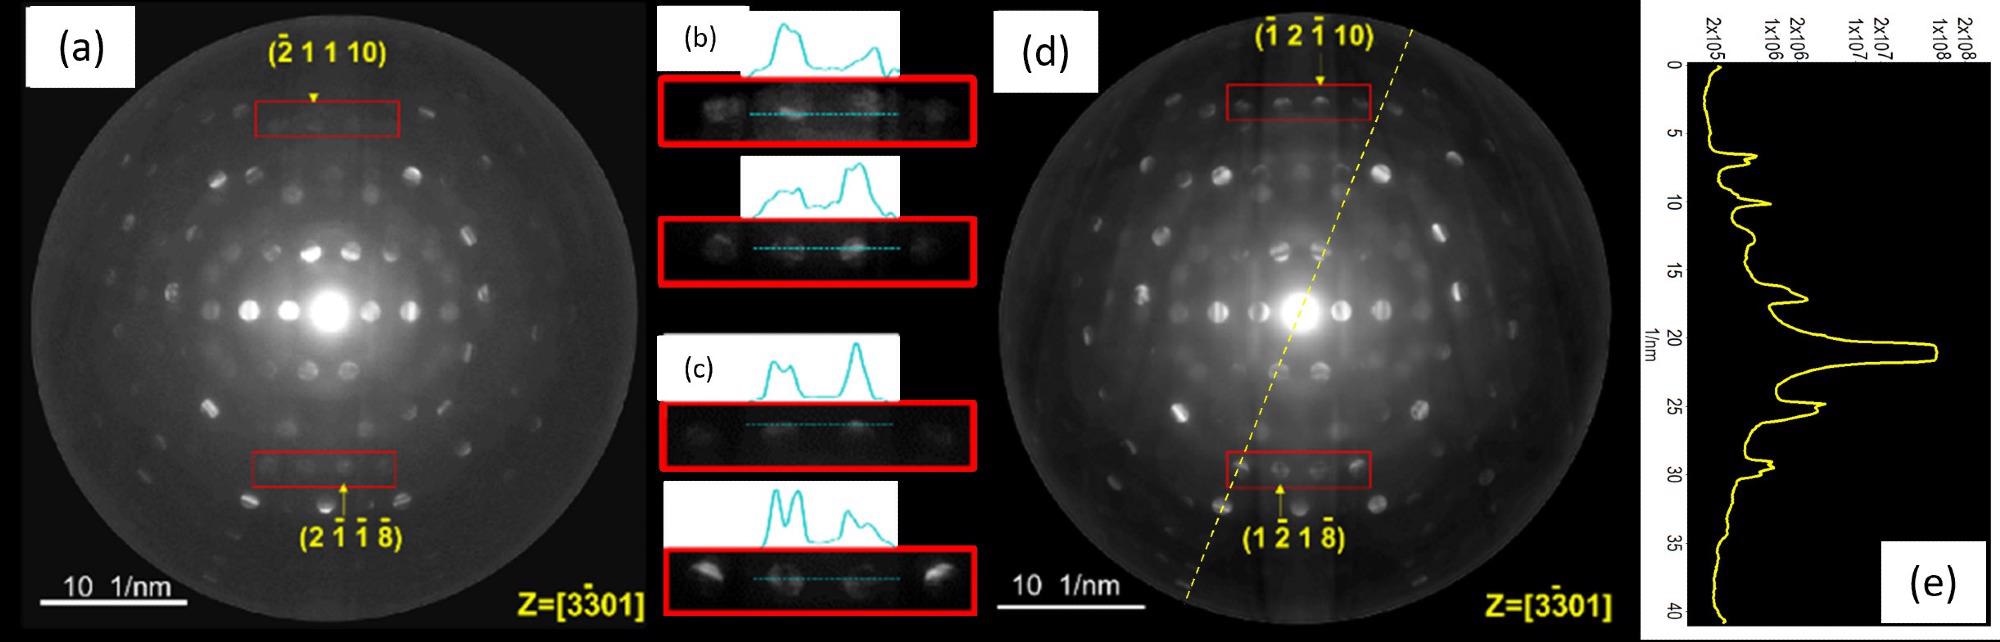 Experimental CBED patterns of (a) FEC-1 and (d) FEC-2 NaCu5S3 along [3301] zone axis, showing the asymmetric intensity distribution of FOLZ reflections in two enantiomers. (b) and (c) high-magnified and contrast-enhanced images of critical discs in the red-marked box in (a) and (d): the intensity profile of critical discs shows the asymmetric brightness. (e) intensity profile along the dashed yellow line in (d): no saturation (32 bit) at the central beam location (log scale).